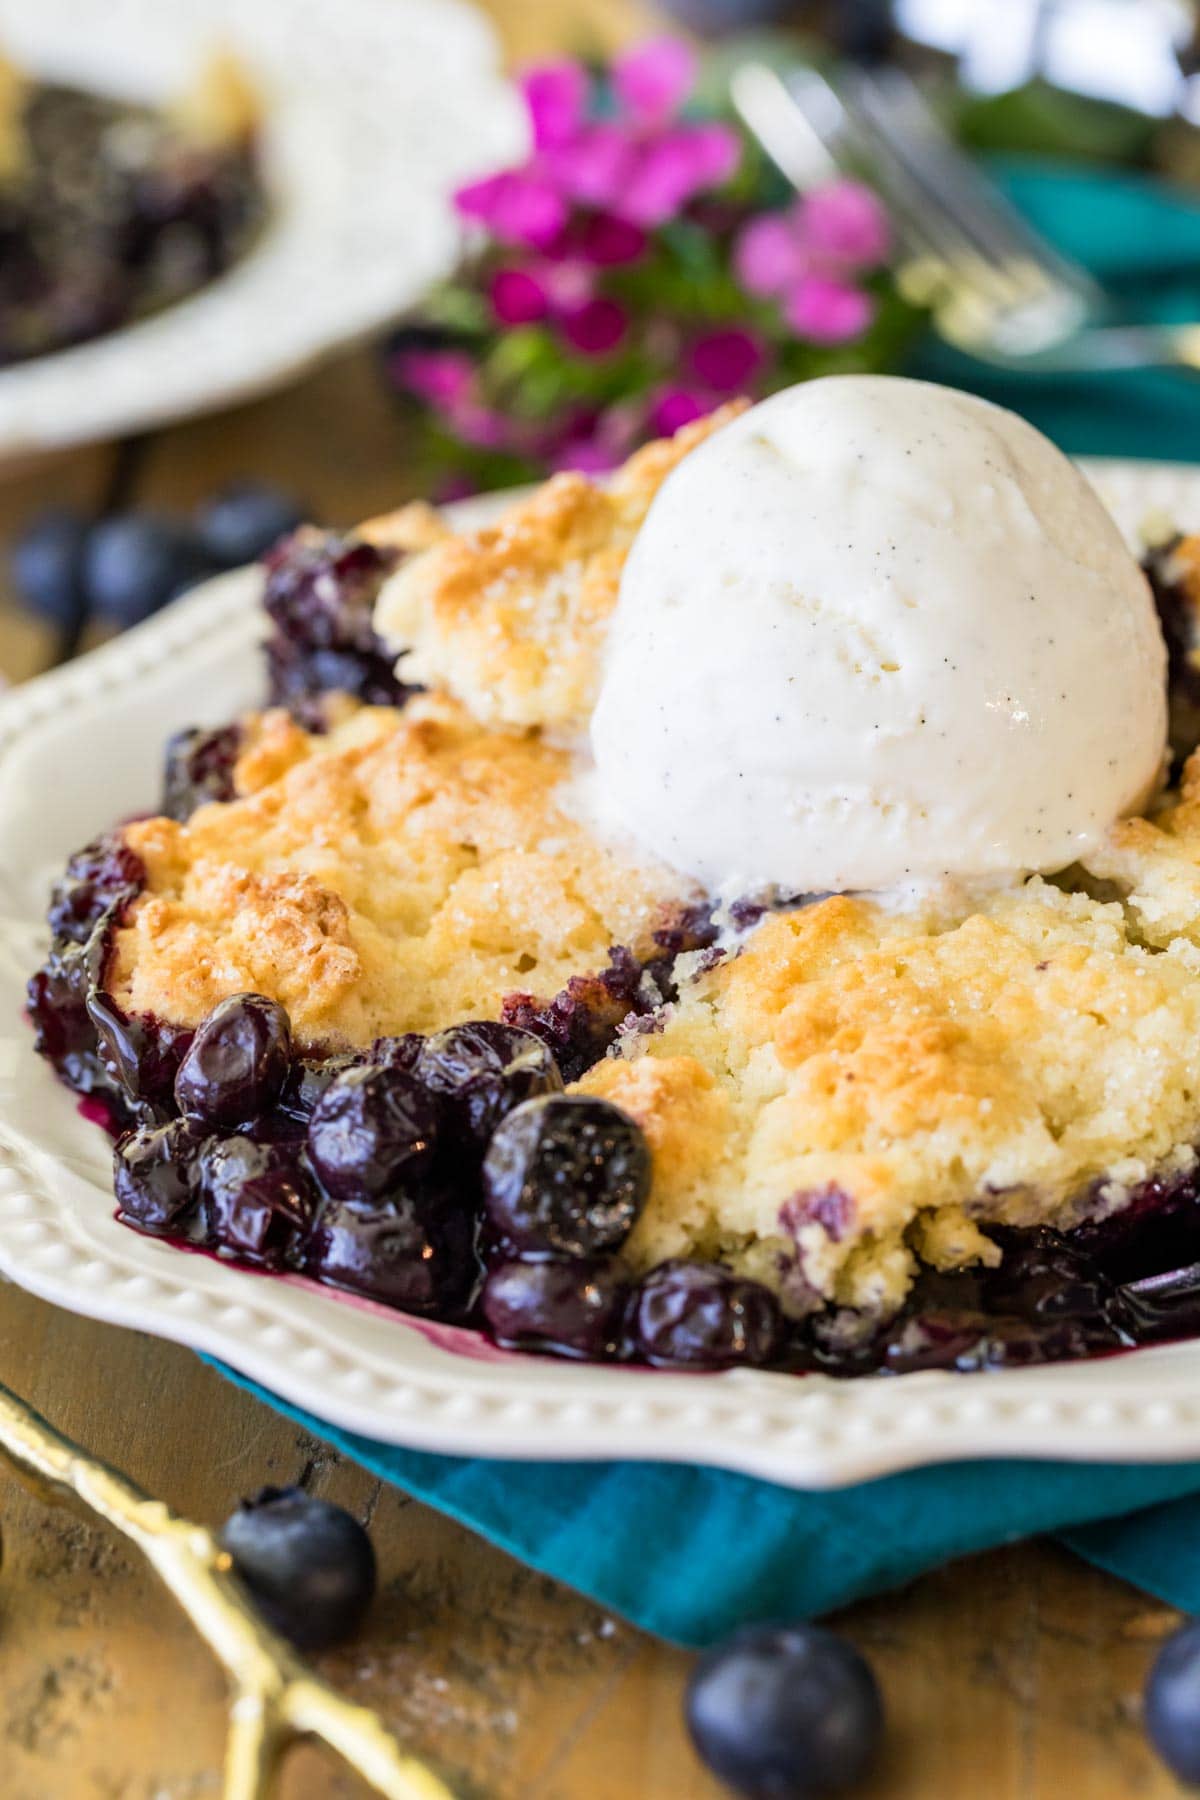 Serving of blueberry cobbler topped with a scoop of vanilla ice cream in a white dish.